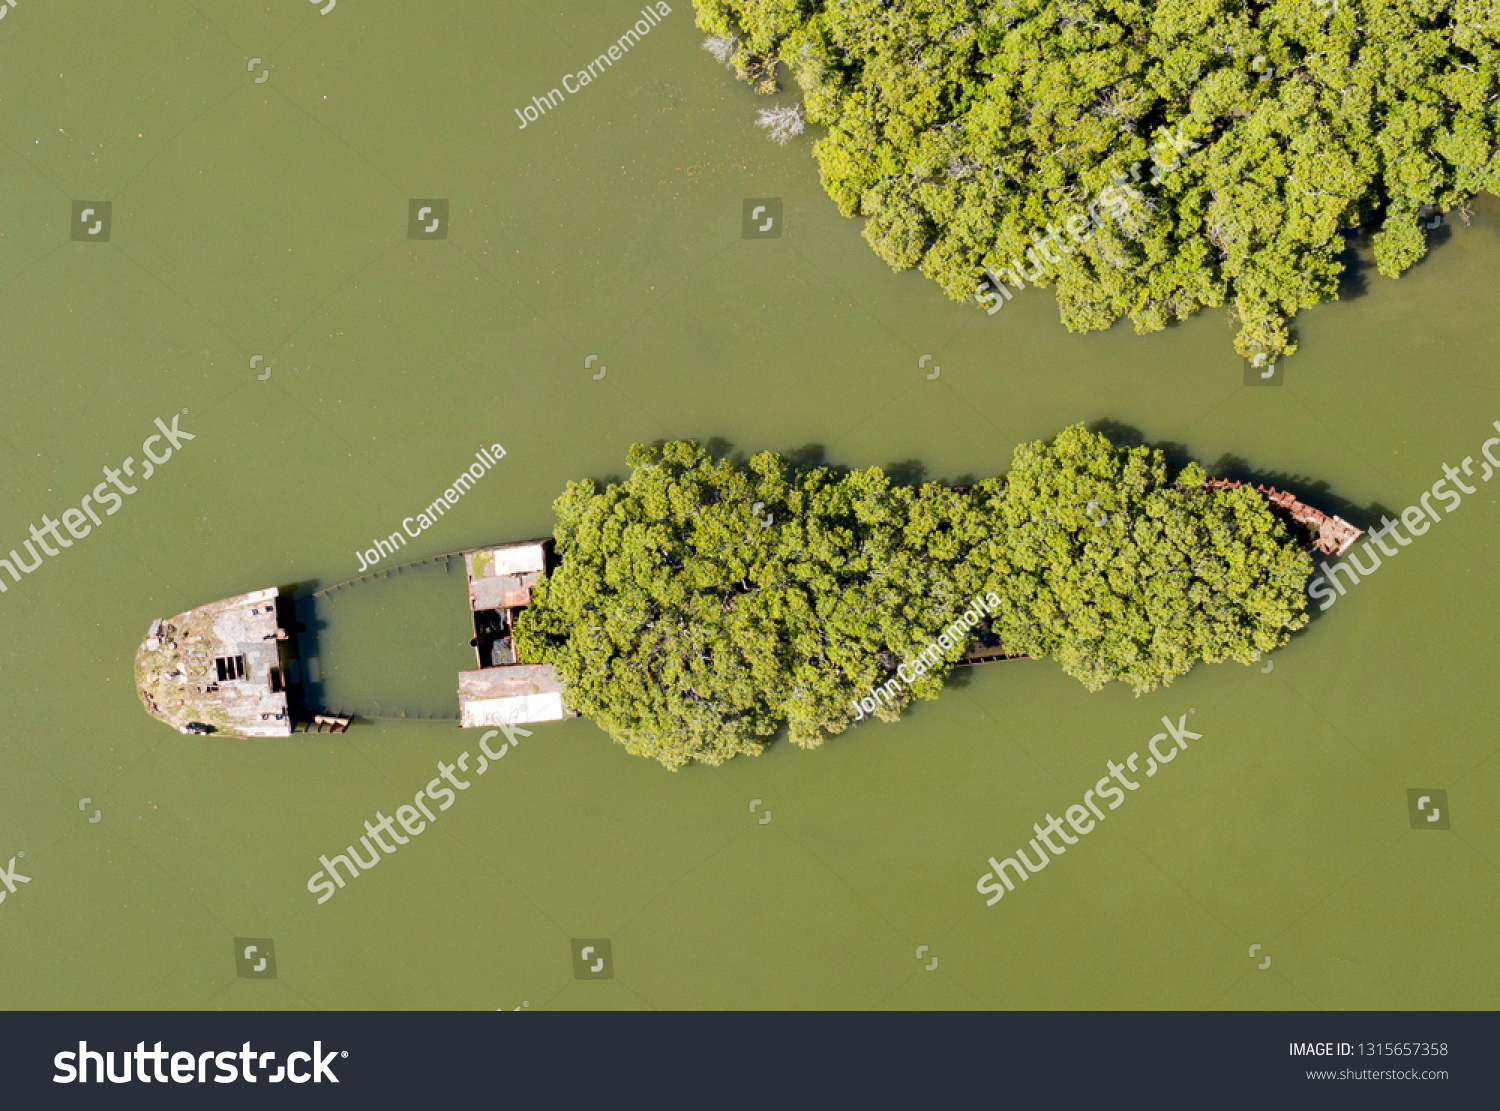 shipwreck of the SS Ayrfield on the Parramatta river Sydney, Australia.    Originally launched as the SS Corrimal, the massive 1,140-tonne steel beast was built in 1911 in the UK #1315657358